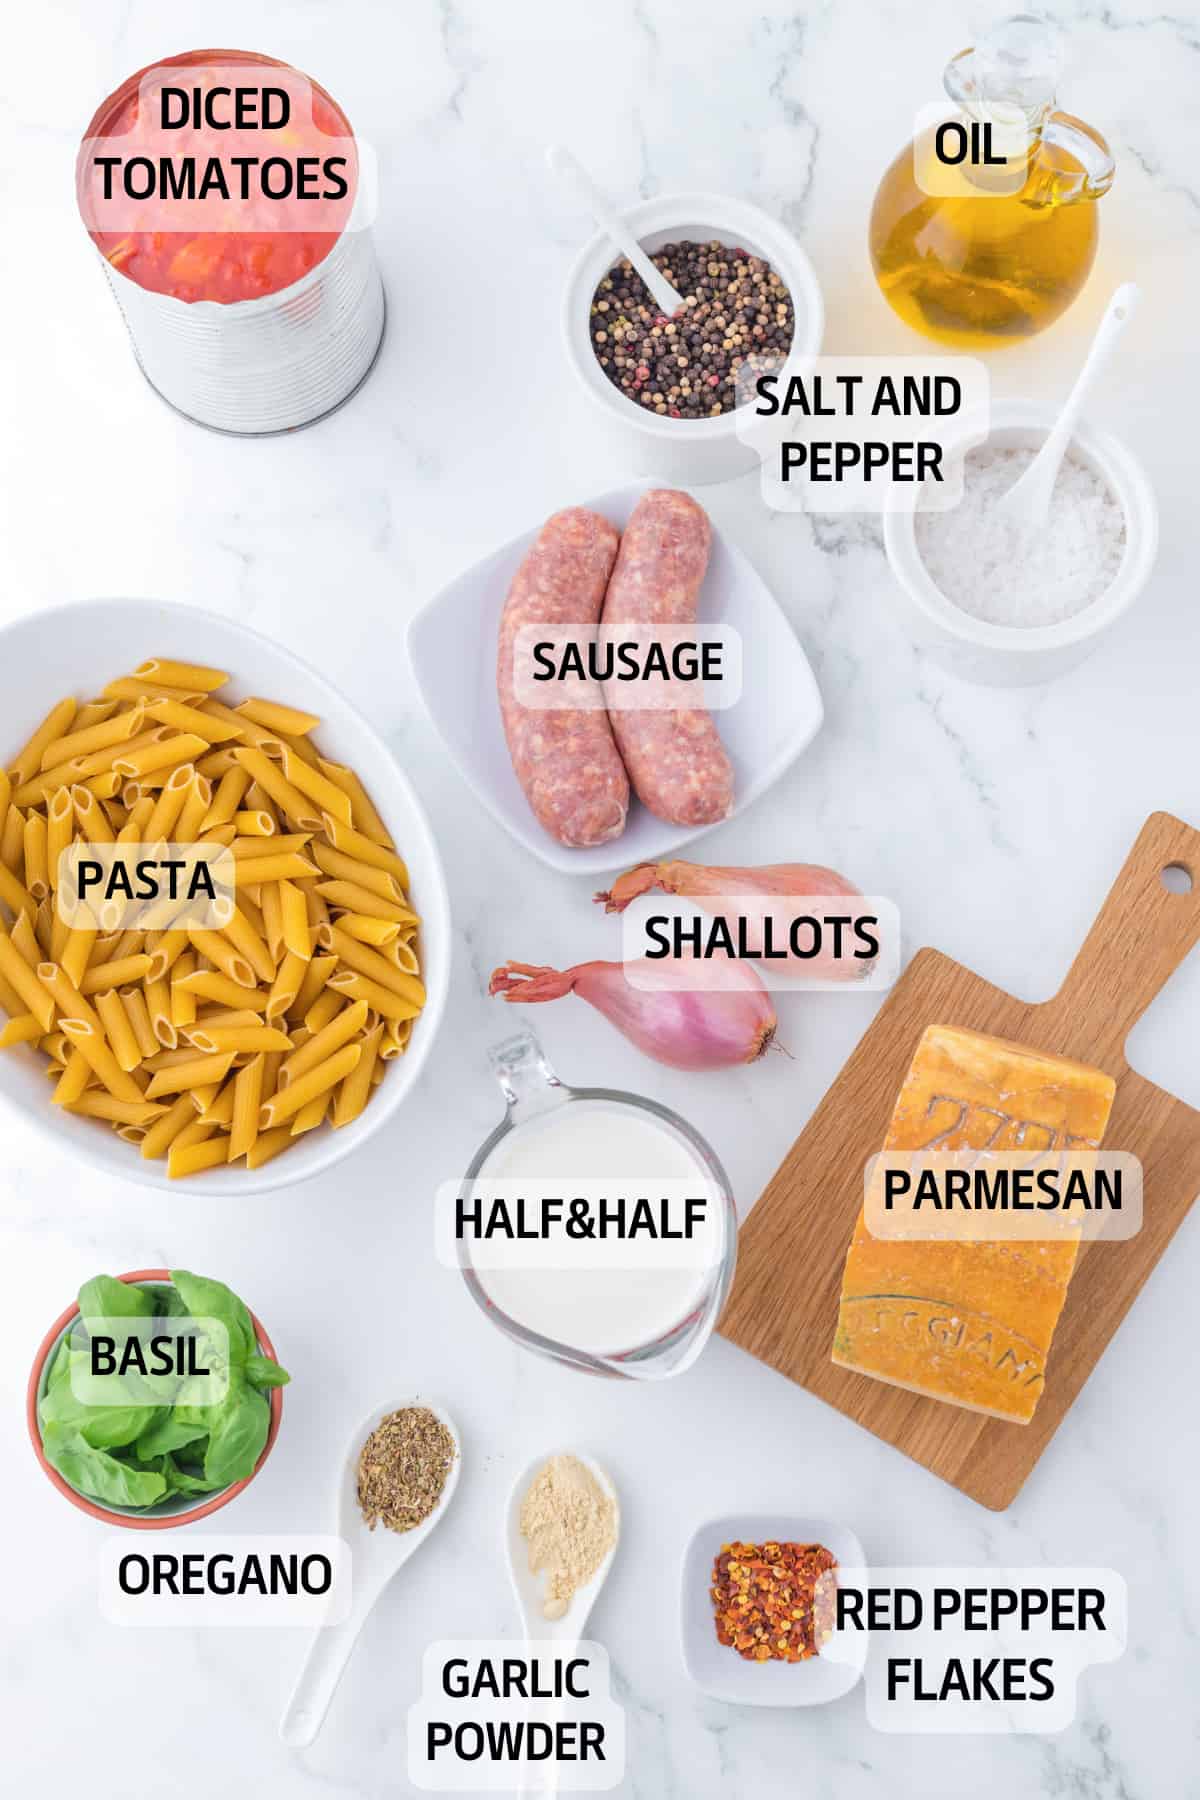 All the ingredients you need to make this recipe: penne, tomatoes, sausages, parmesan, shallots, spices, half&half.